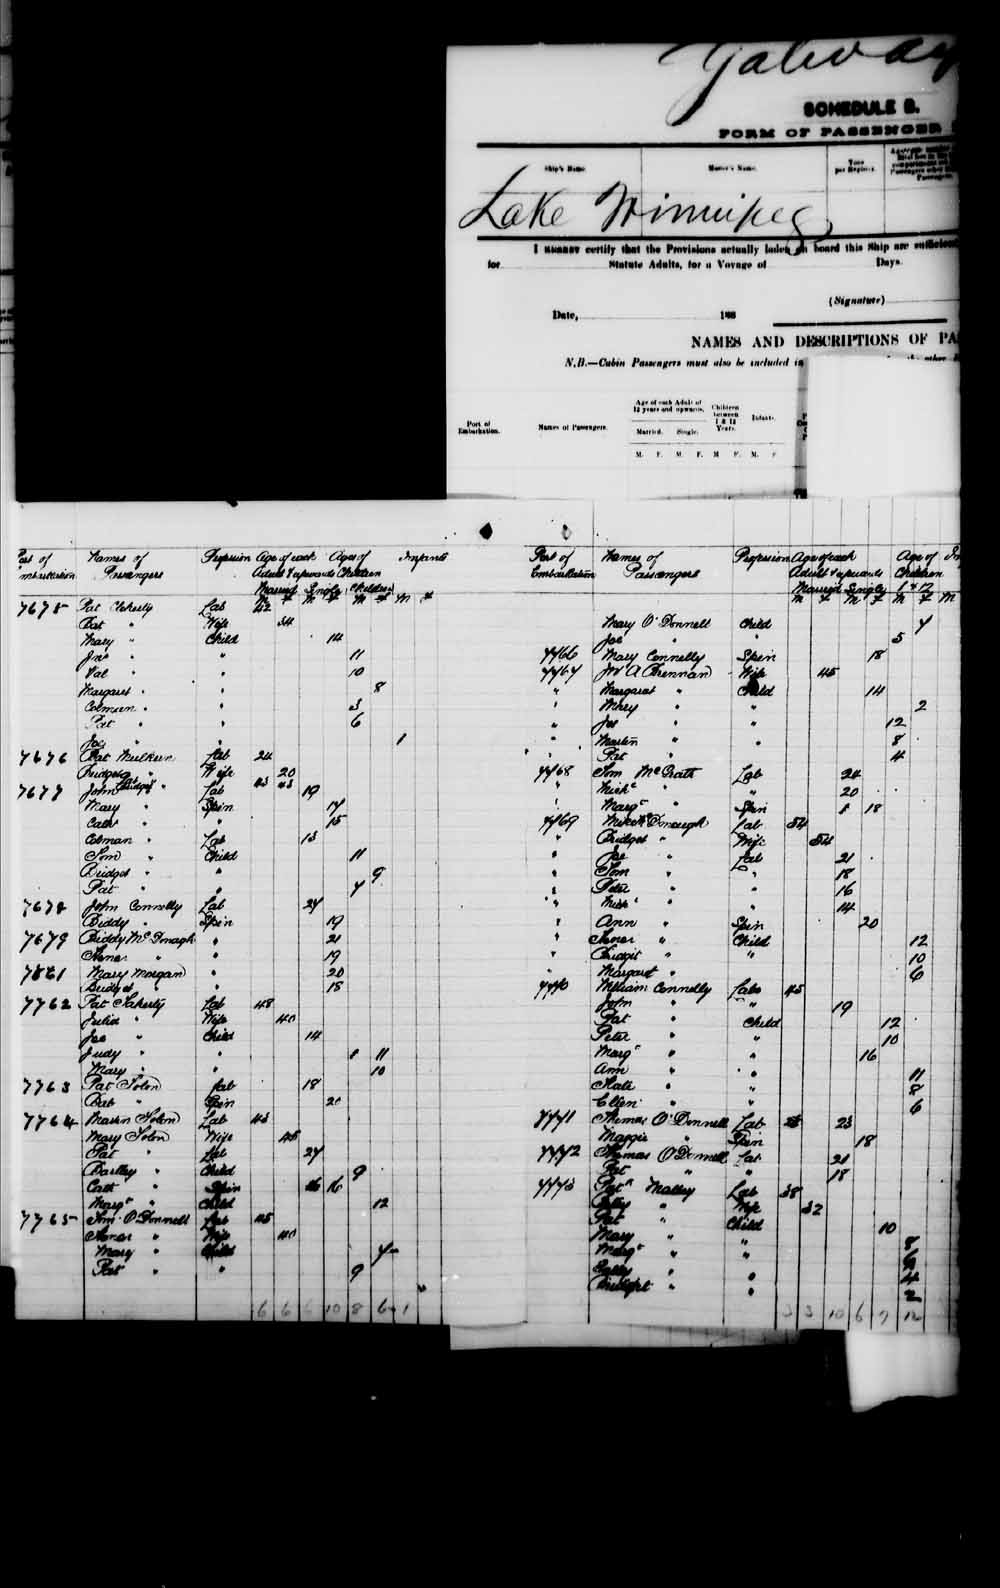 Digitized page of Passenger Lists for Image No.: e003541623